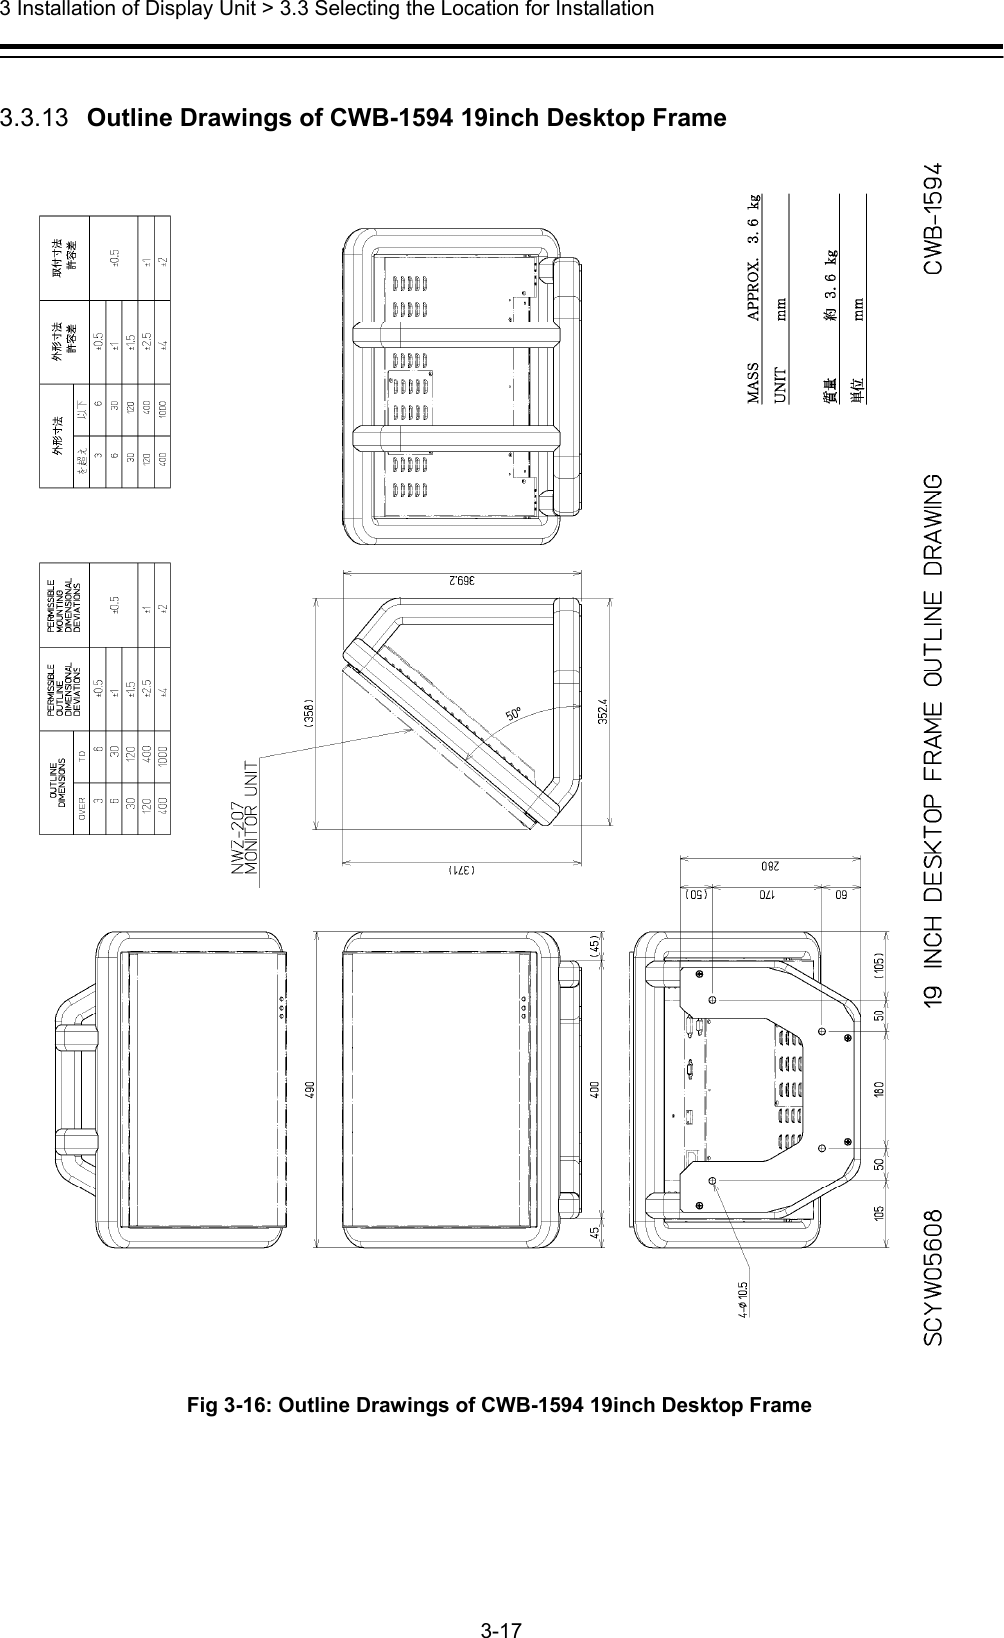  3 Installation of Display Unit &gt; 3.3 Selecting the Location for Installation 3-17   3.3.13   Outline Drawings of CWB-1594 19inch Desktop Frame  Fig 3-16: Outline Drawings of CWB-1594 19inch Desktop Frame 